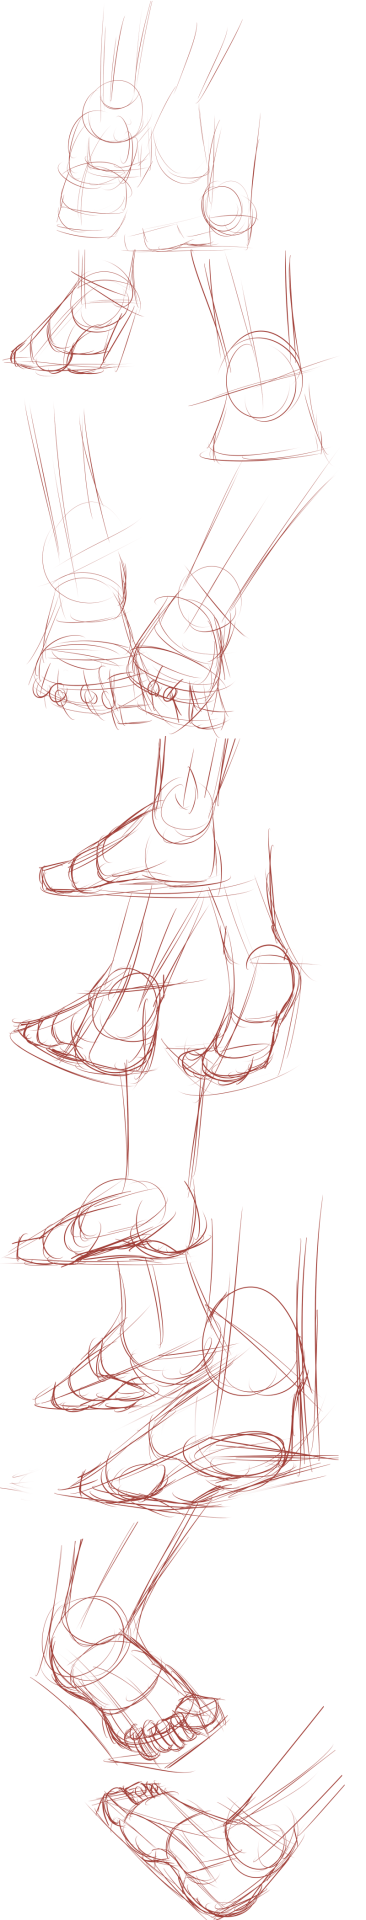 This is the foot study, I&rsquo;ve been reading up on the structure of the foot;